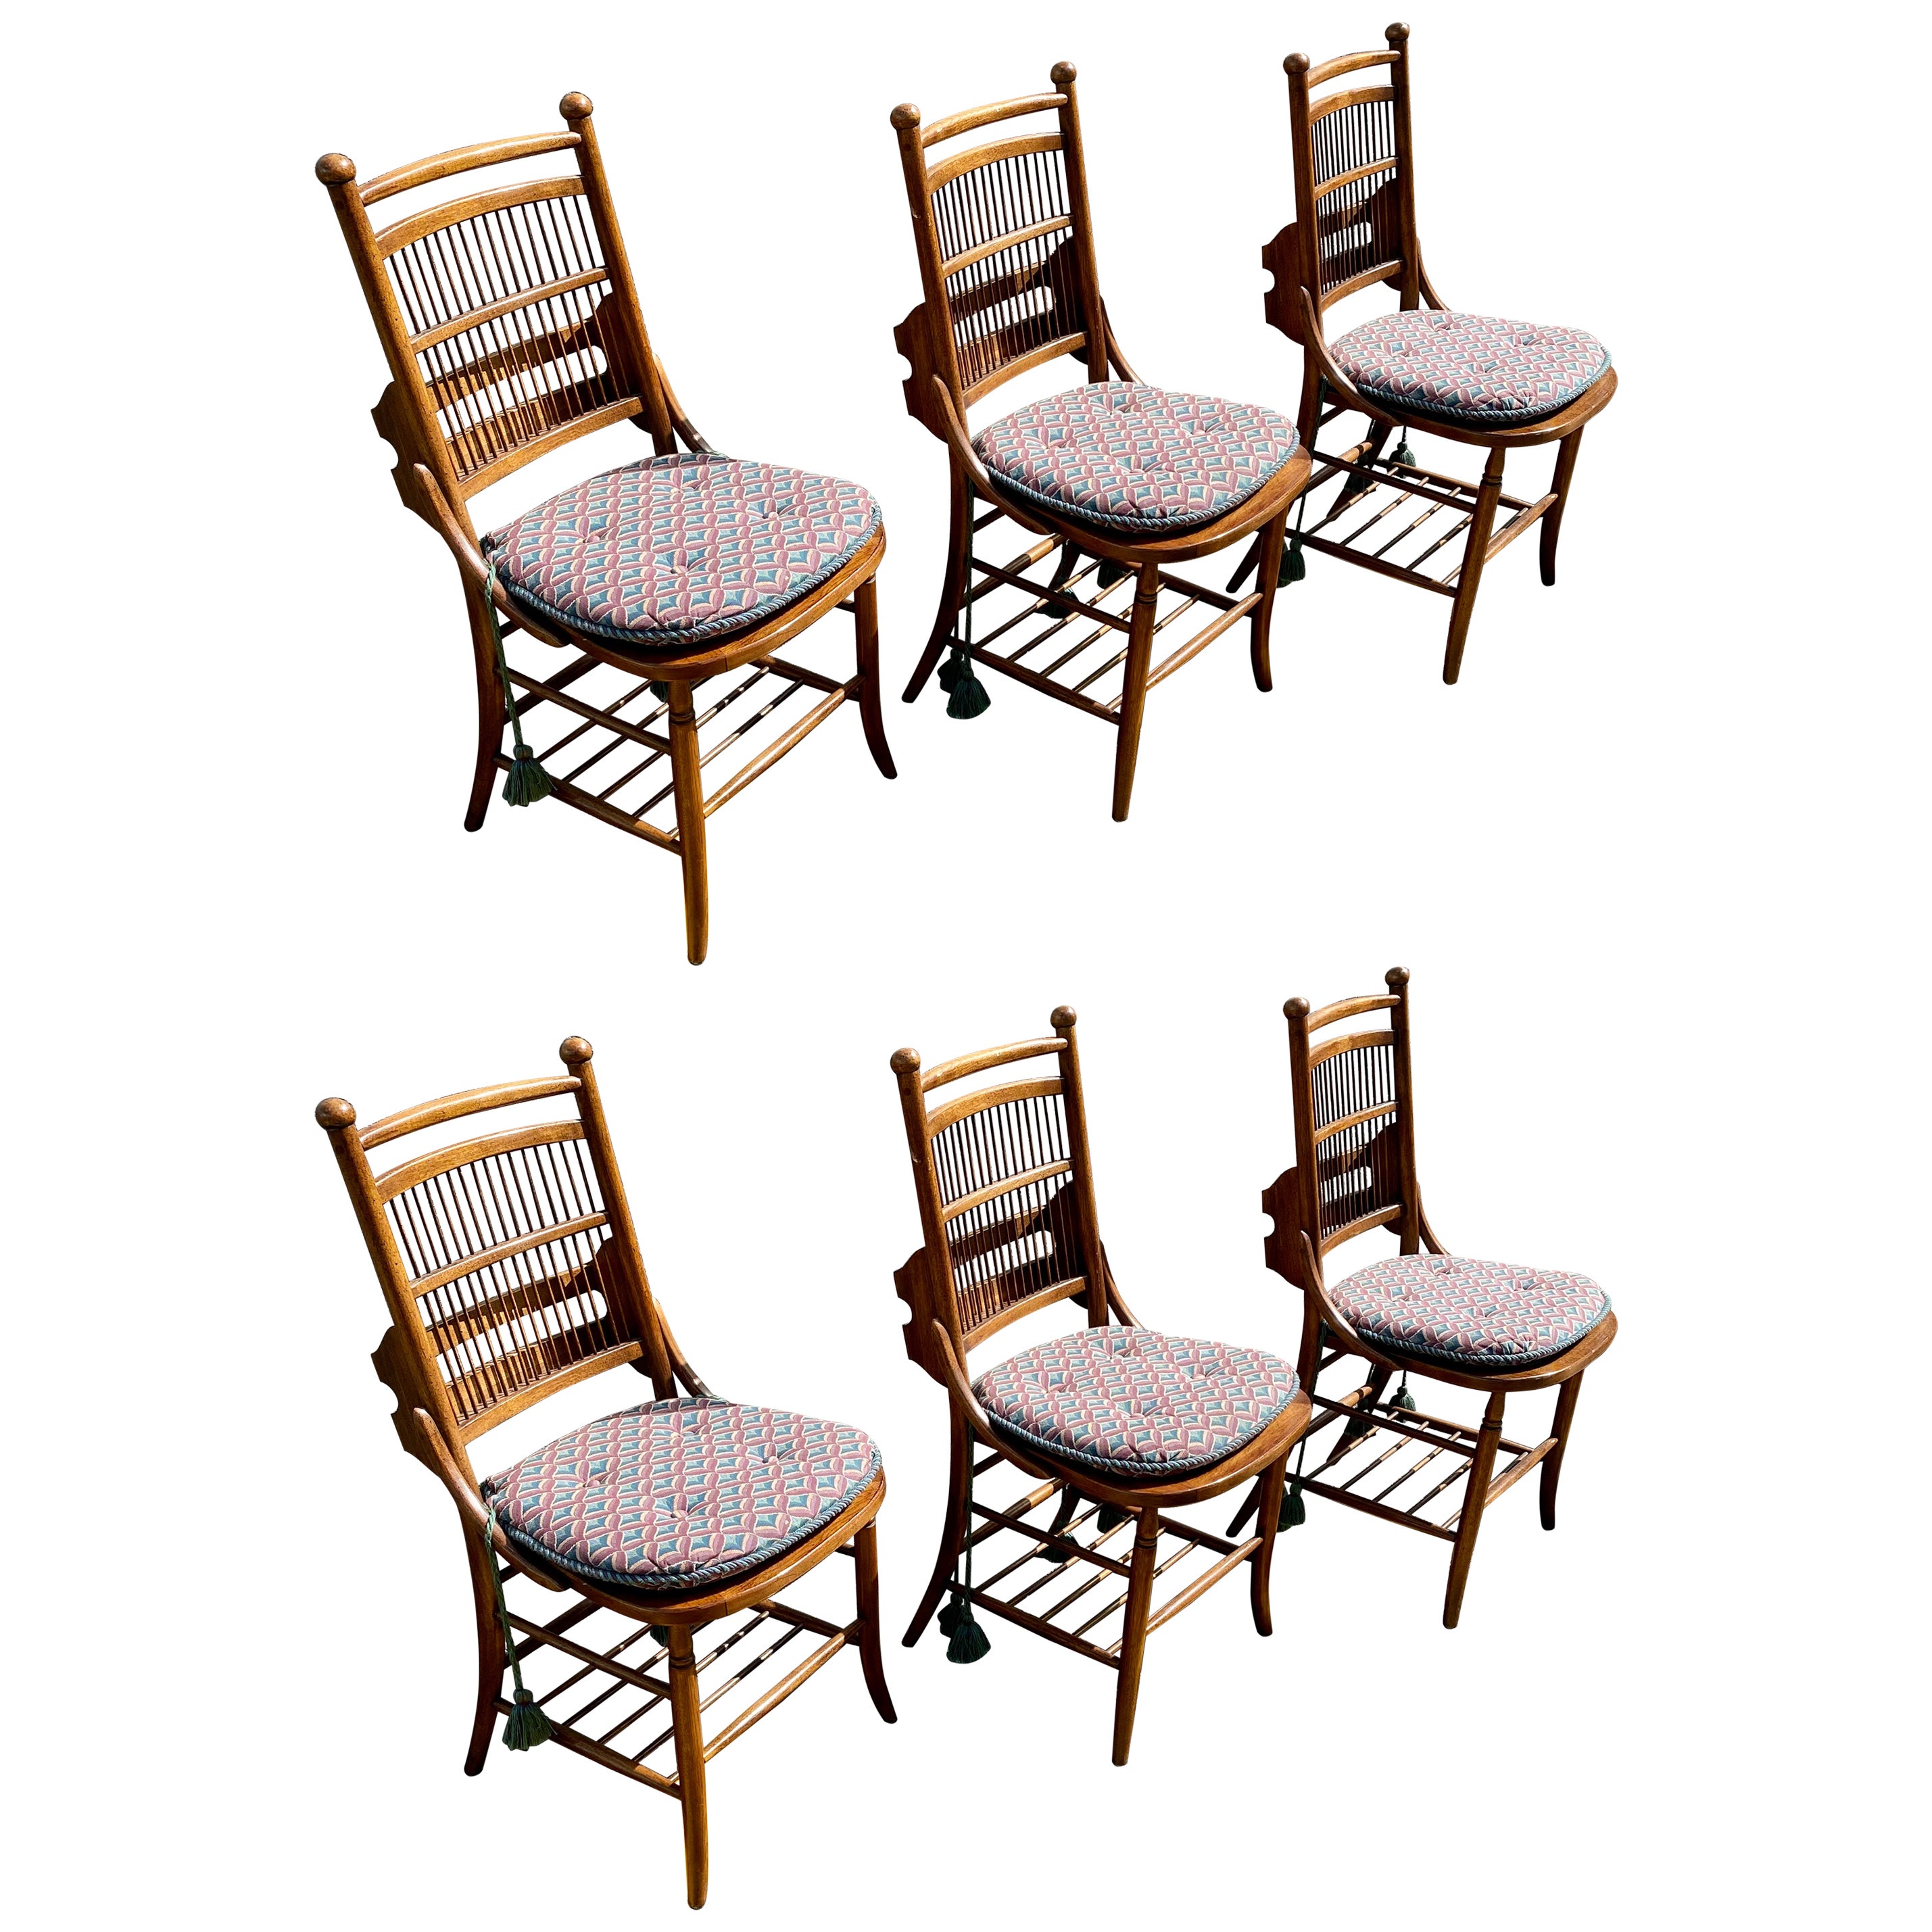 1960s Thomasville Cane Slatted Wood Dining Chairs. Set of 6 For Sale